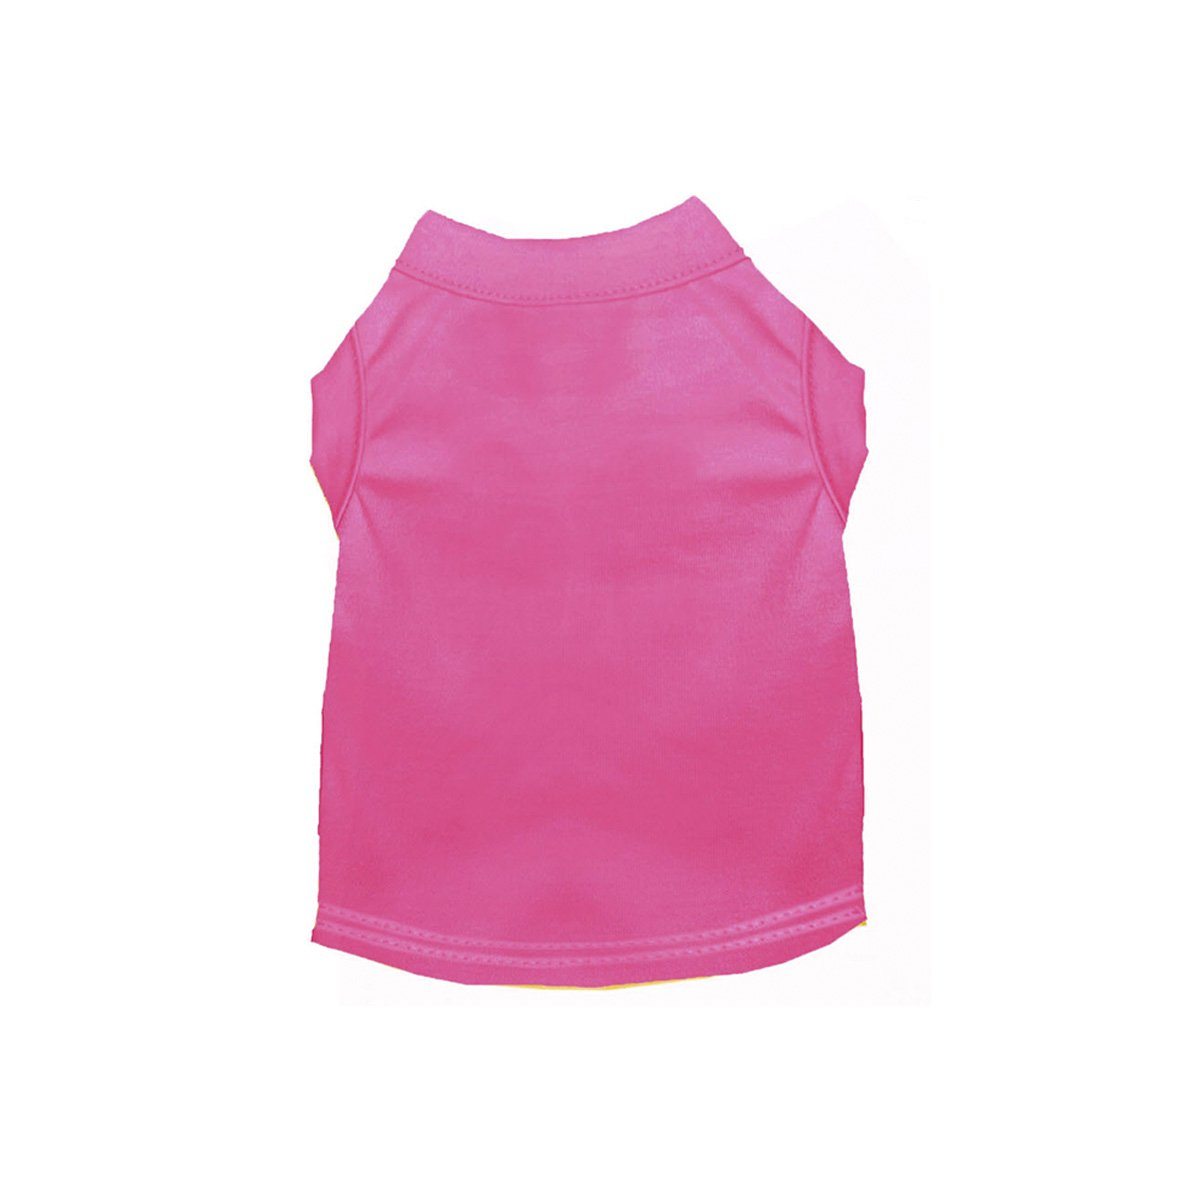 Cotton Poly Blend Tee Shirt in Bright Pink | Pawlicious & Company